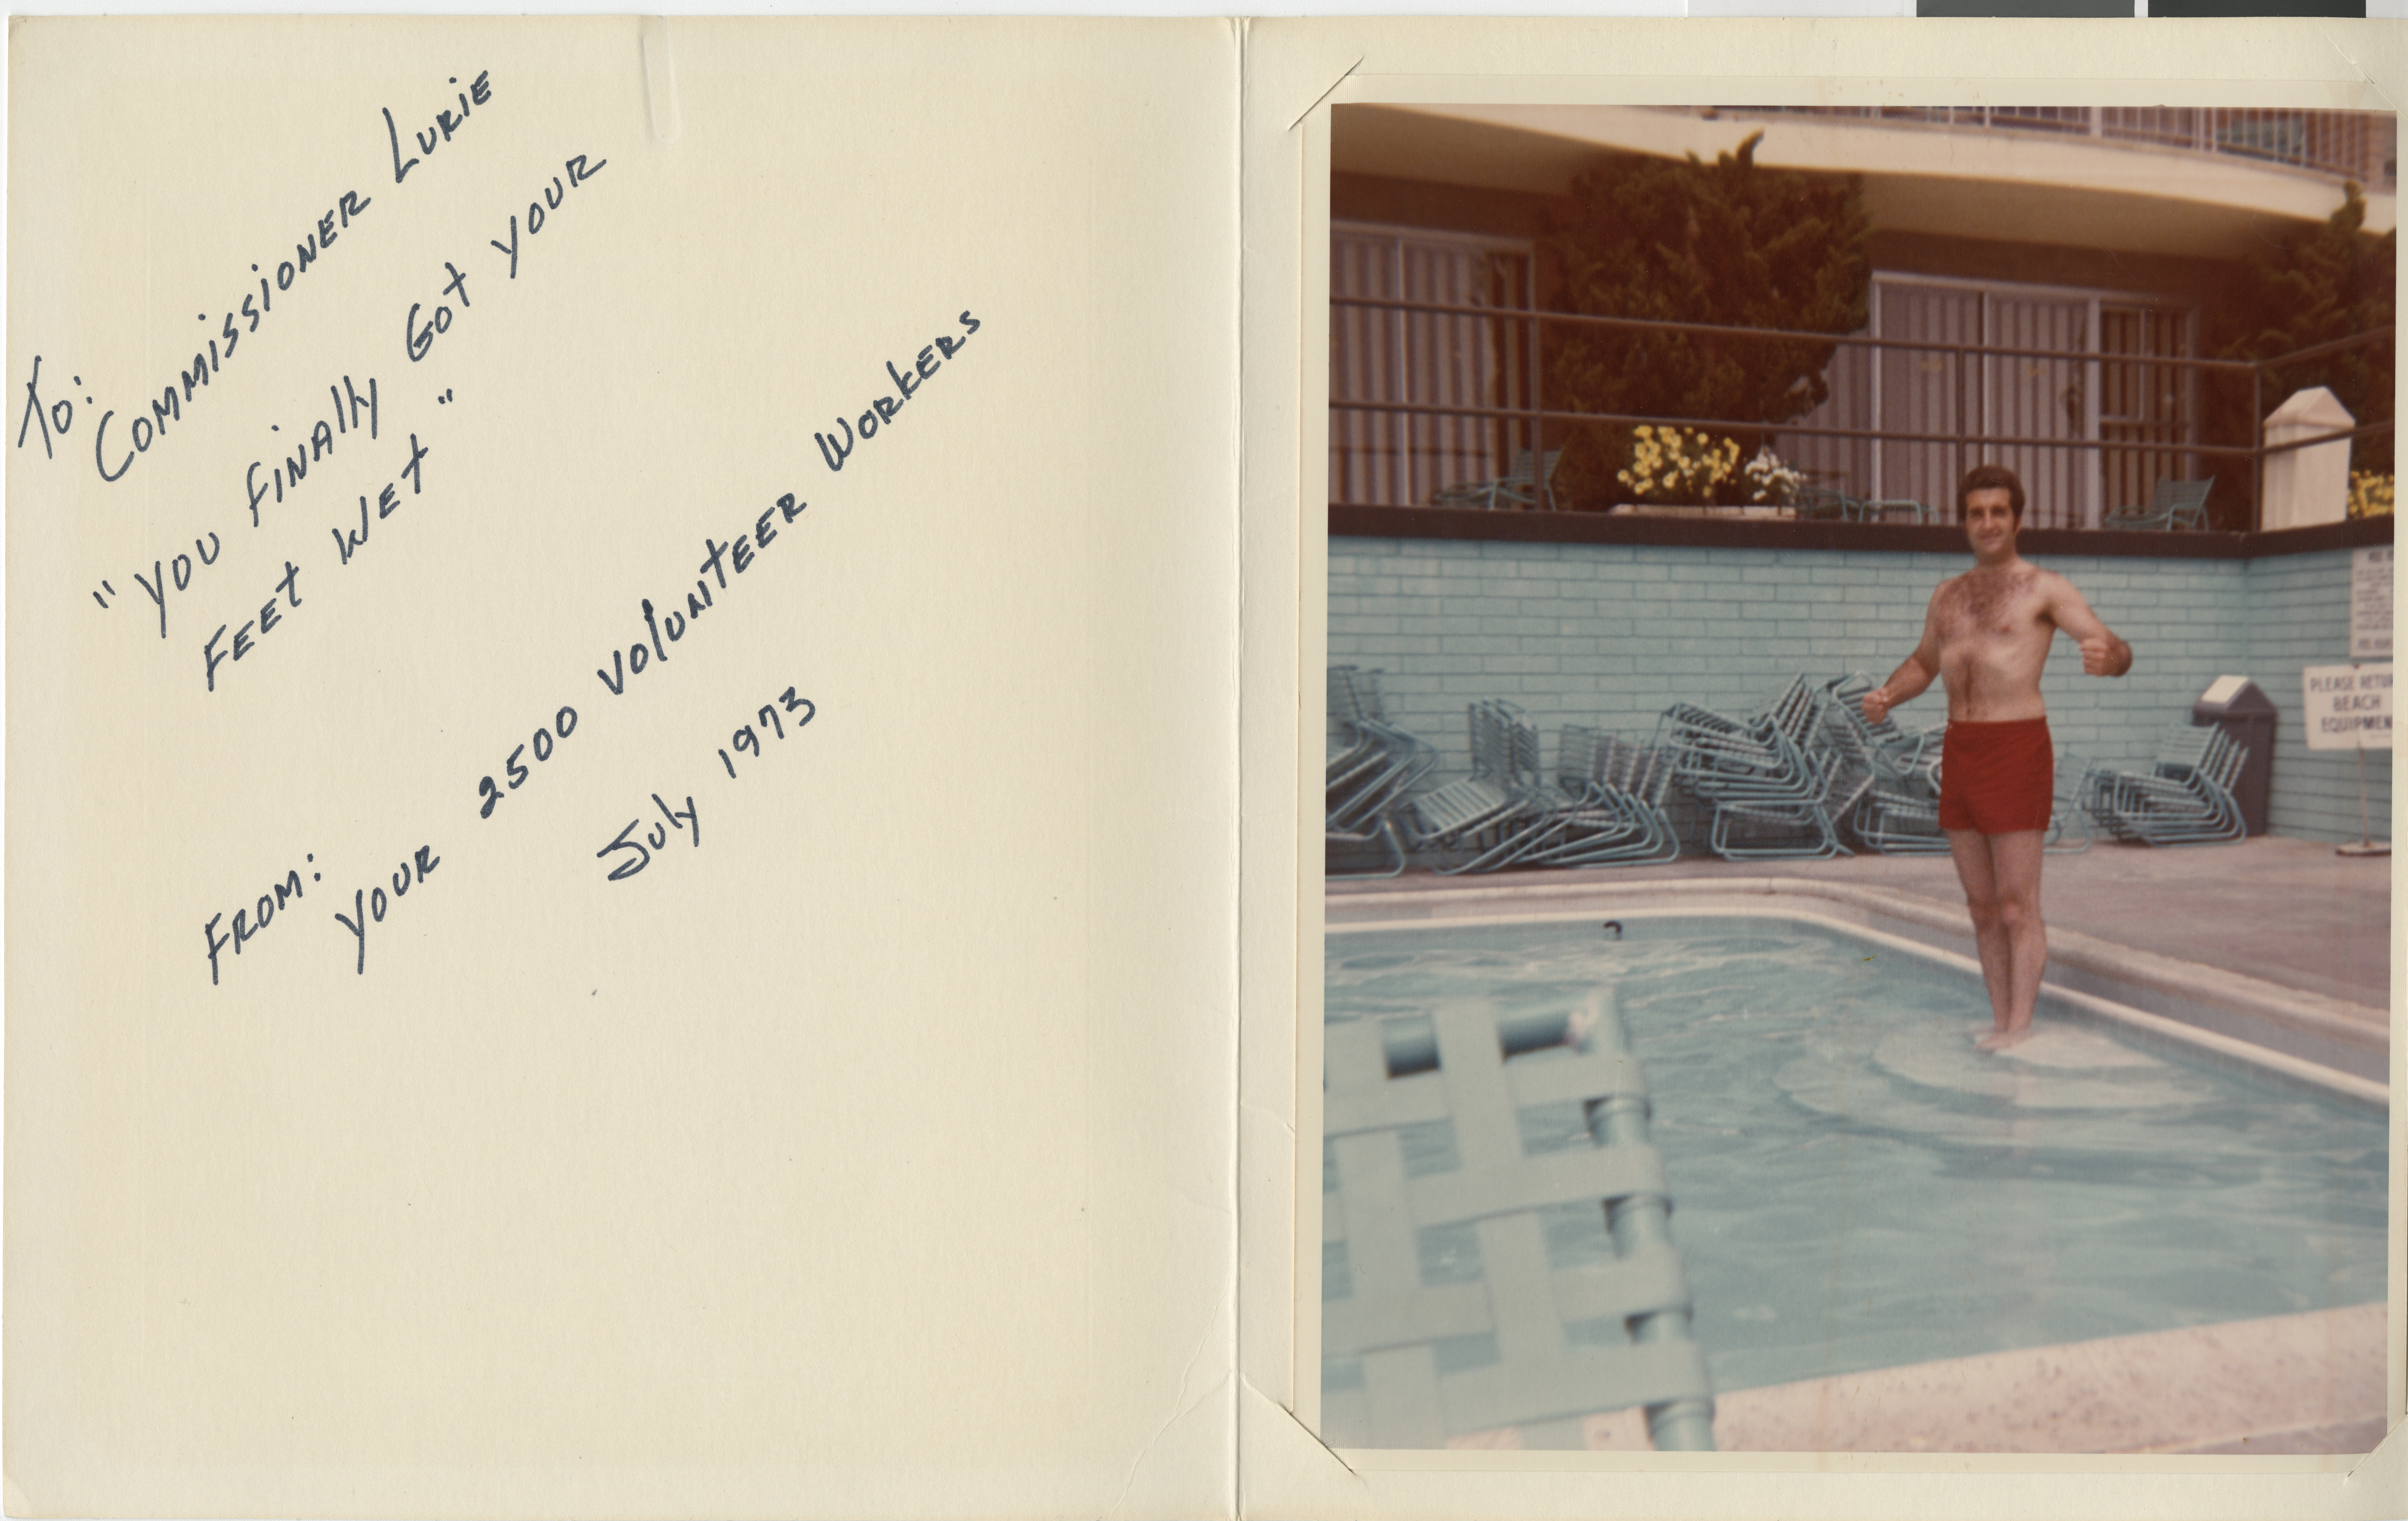 Photograph of Ron Lurie standing in a swimming pool, 1973